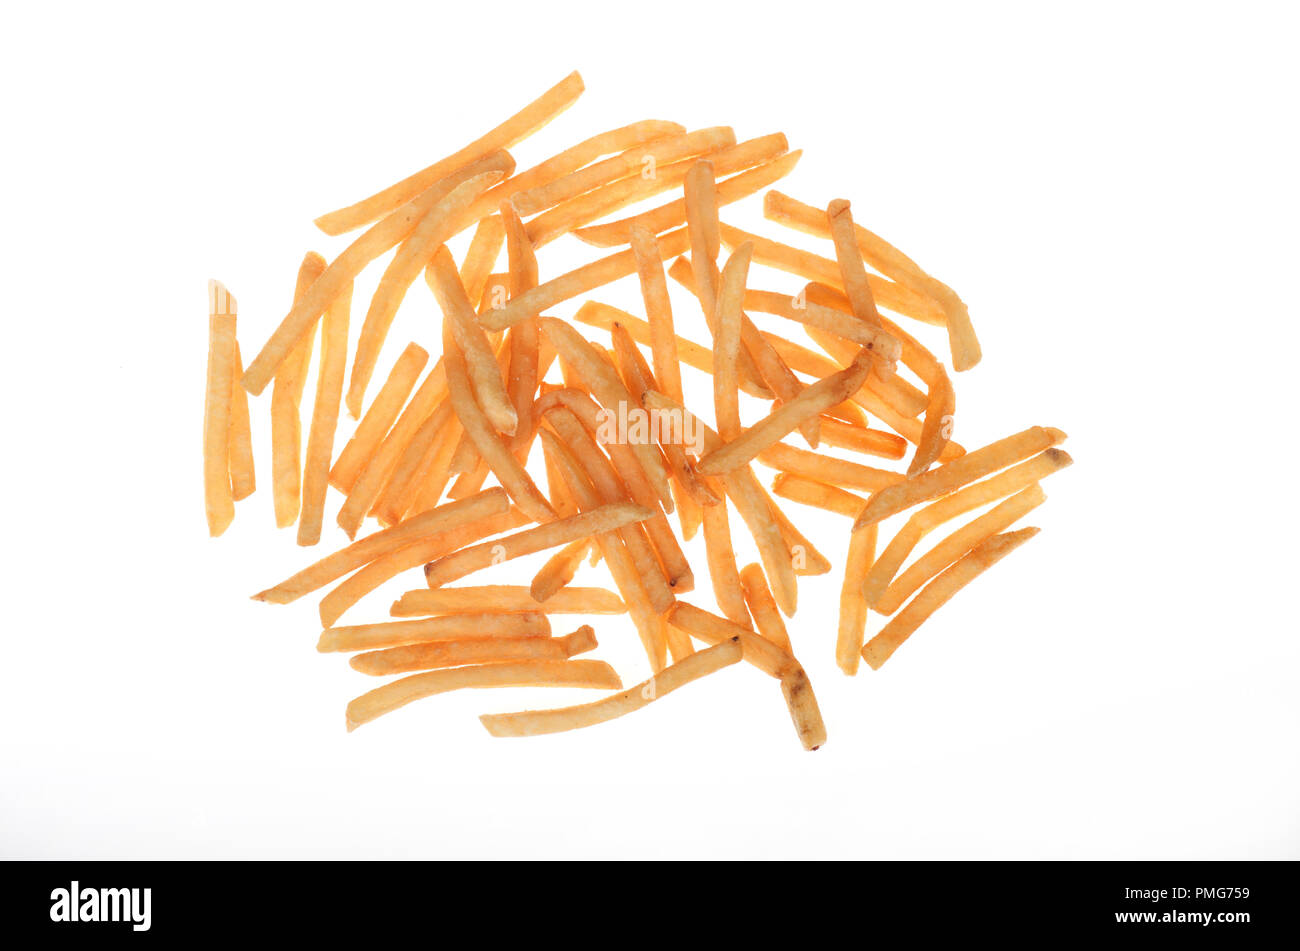 Pile of French fries or chips on white background Stock Photo